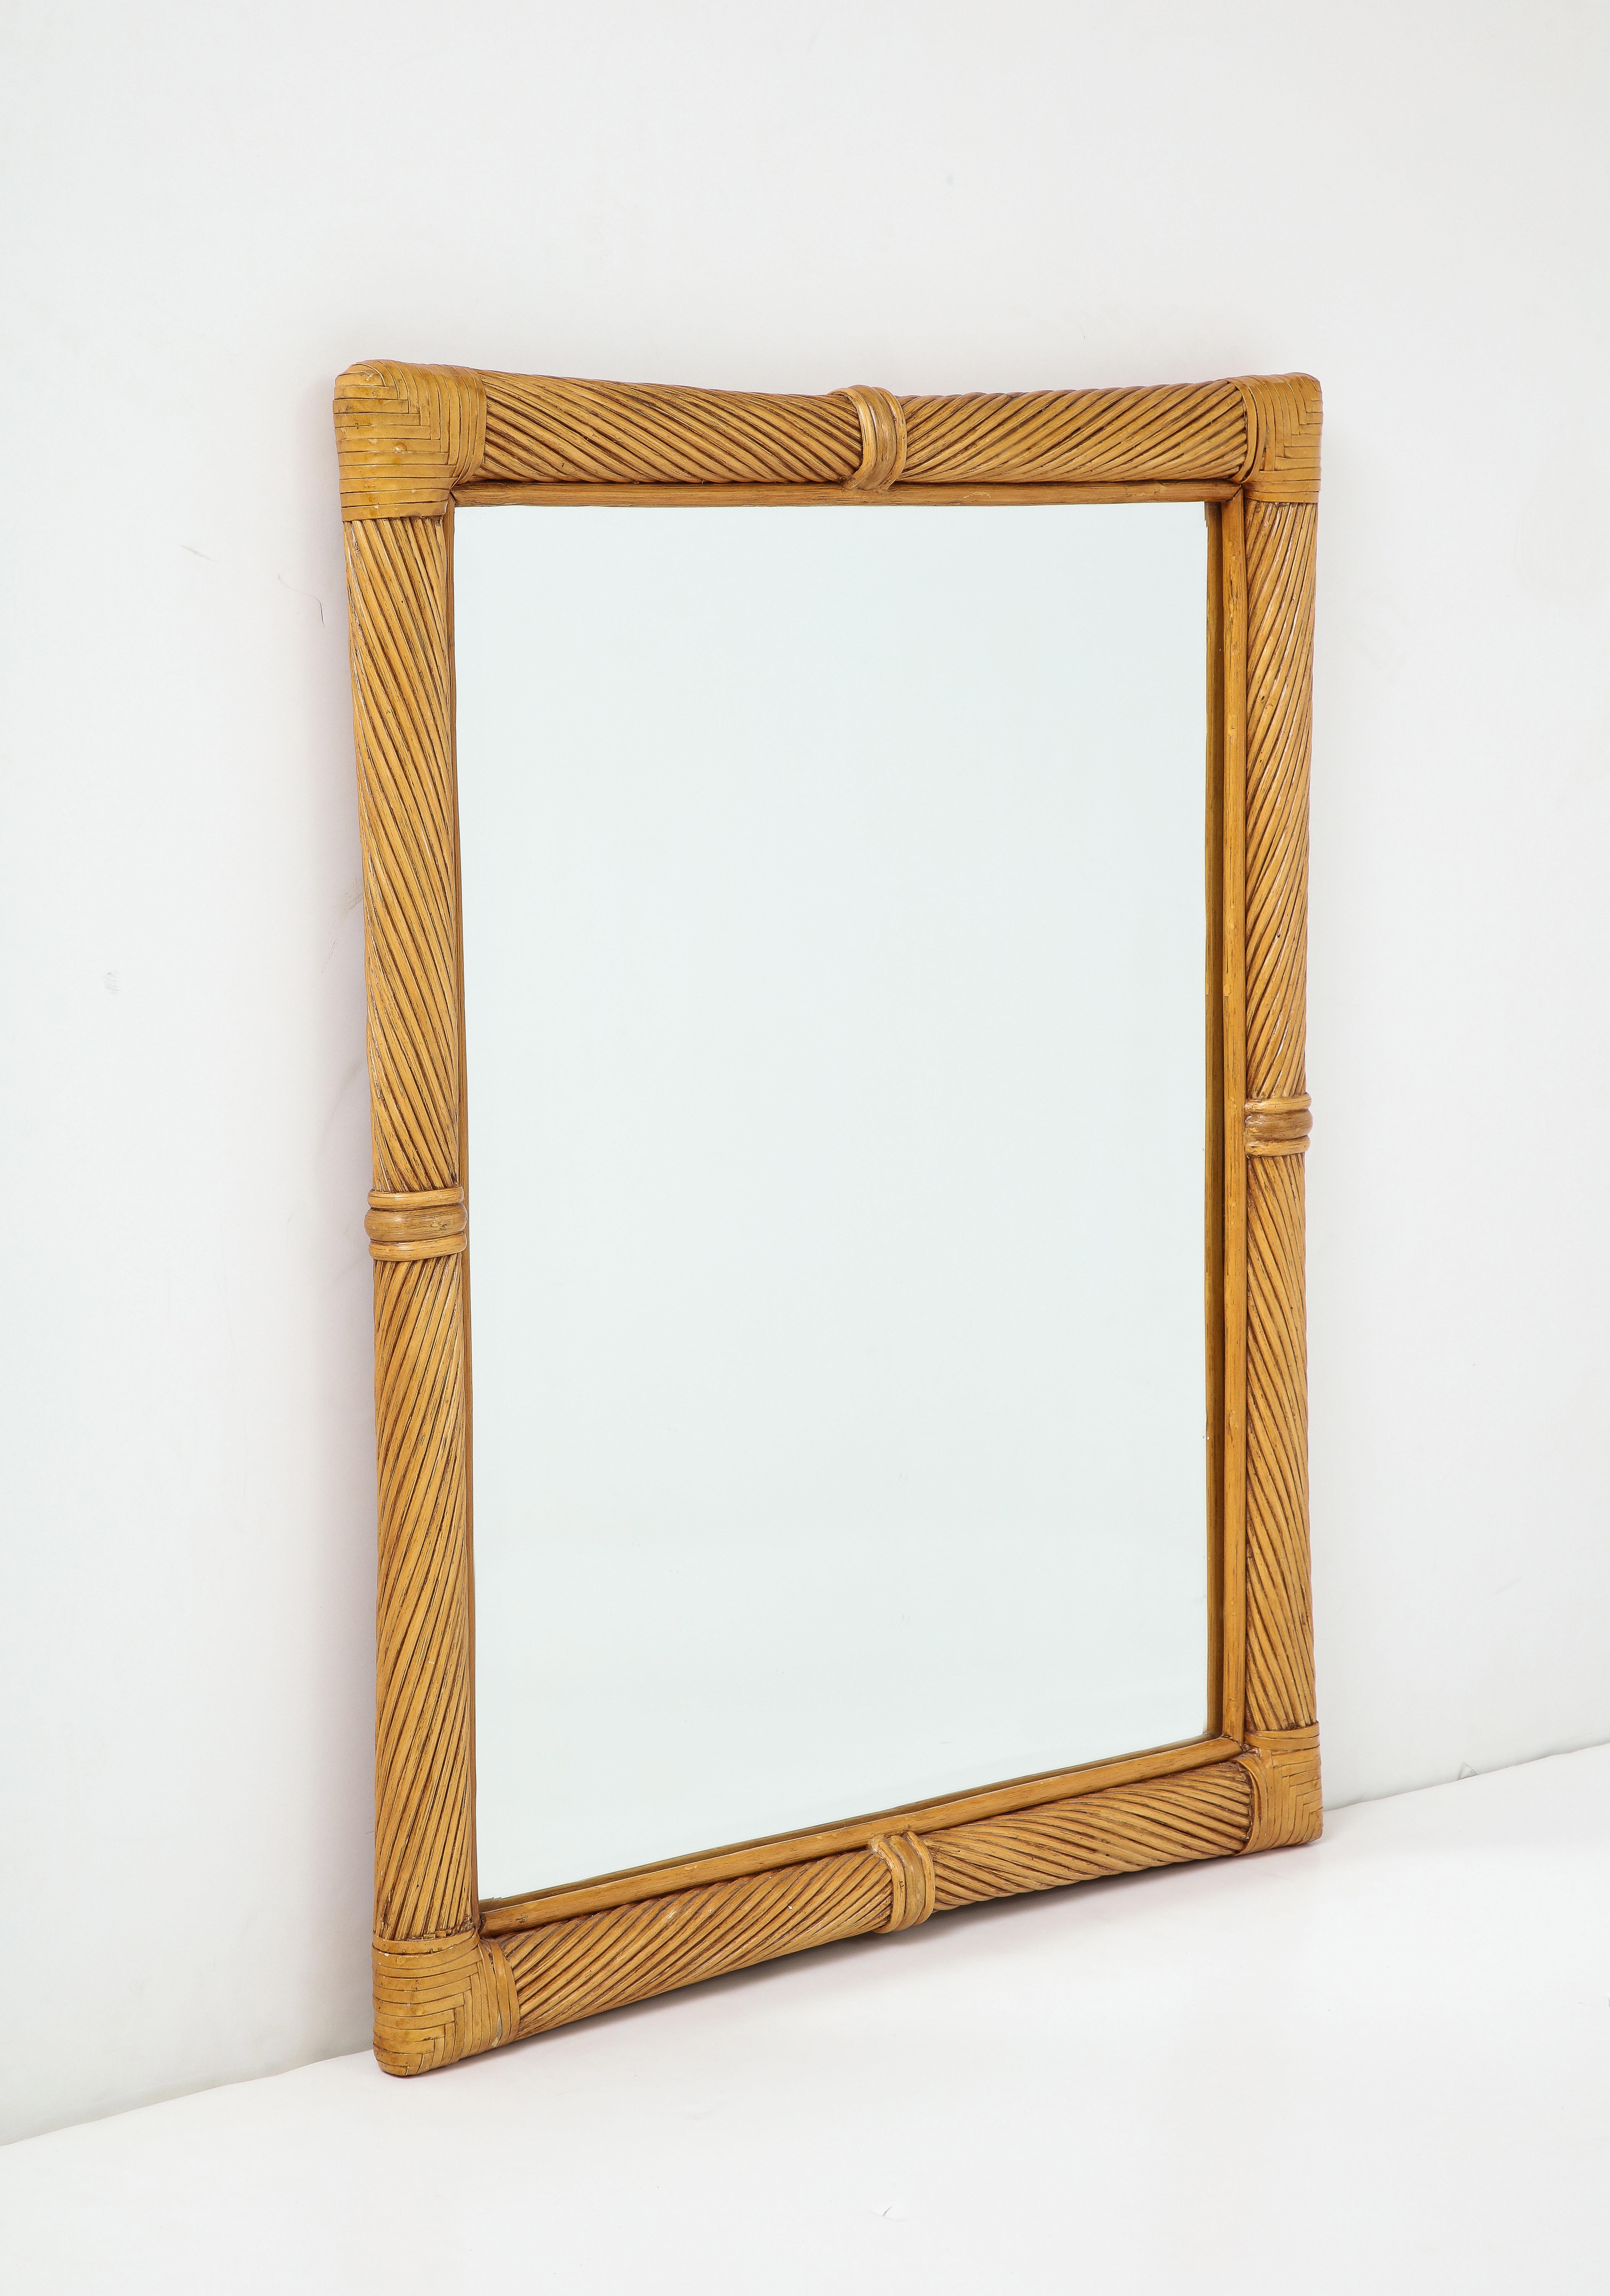 Midcentury French mirror featuring a hand wrapped pencil reed frame. Mirror can be oriented vertically or horizontally.